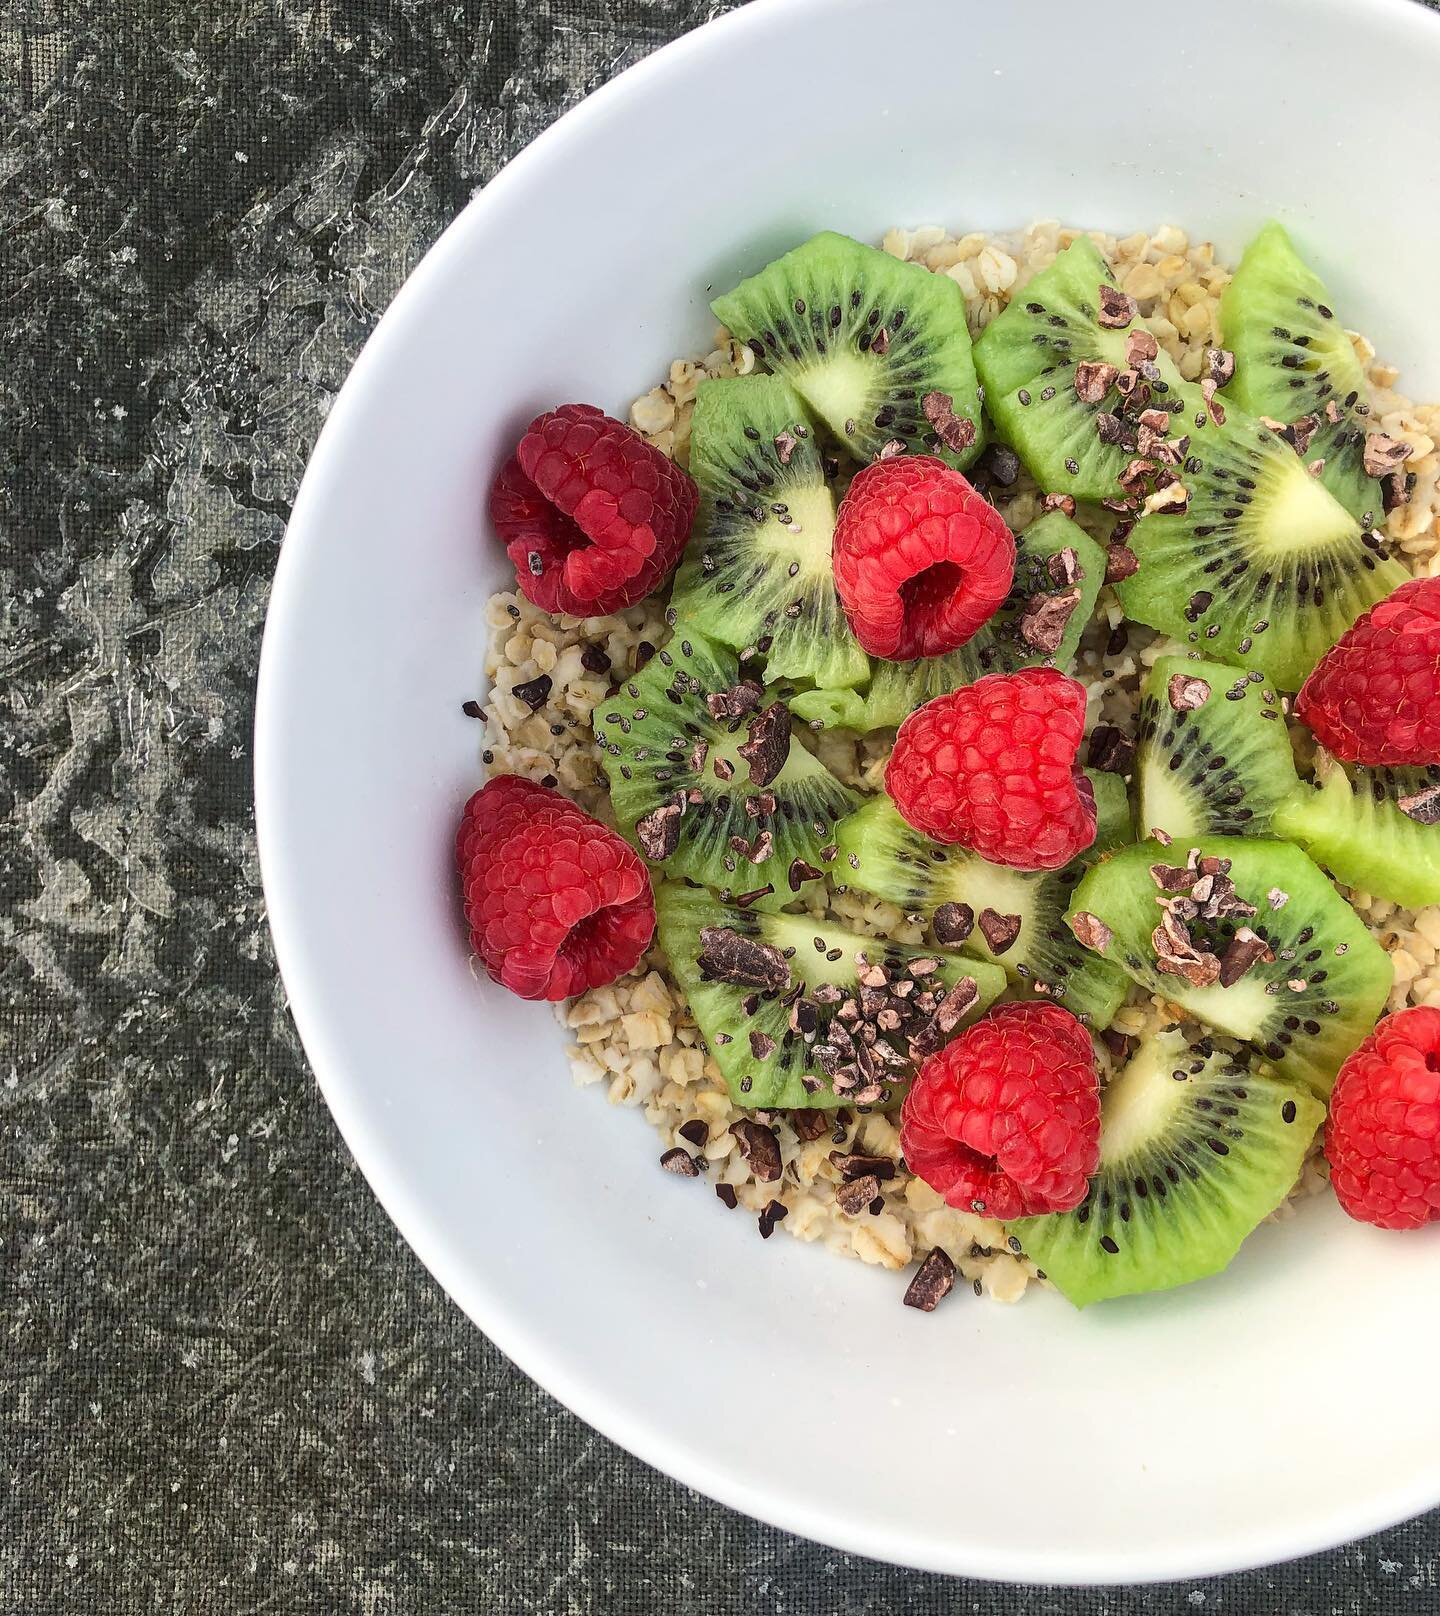 Festive oats for the holiday season!! Sprinkled some cacao nibs into my oatmeal this morning. Bowl contains organic regenerative oats, 1 kiwi, raspberries, chia seeds and cacao.
.
.
.
.
.
.

#oatmealbowl #holidaycheer #holidayfood #holidaybaking #oat